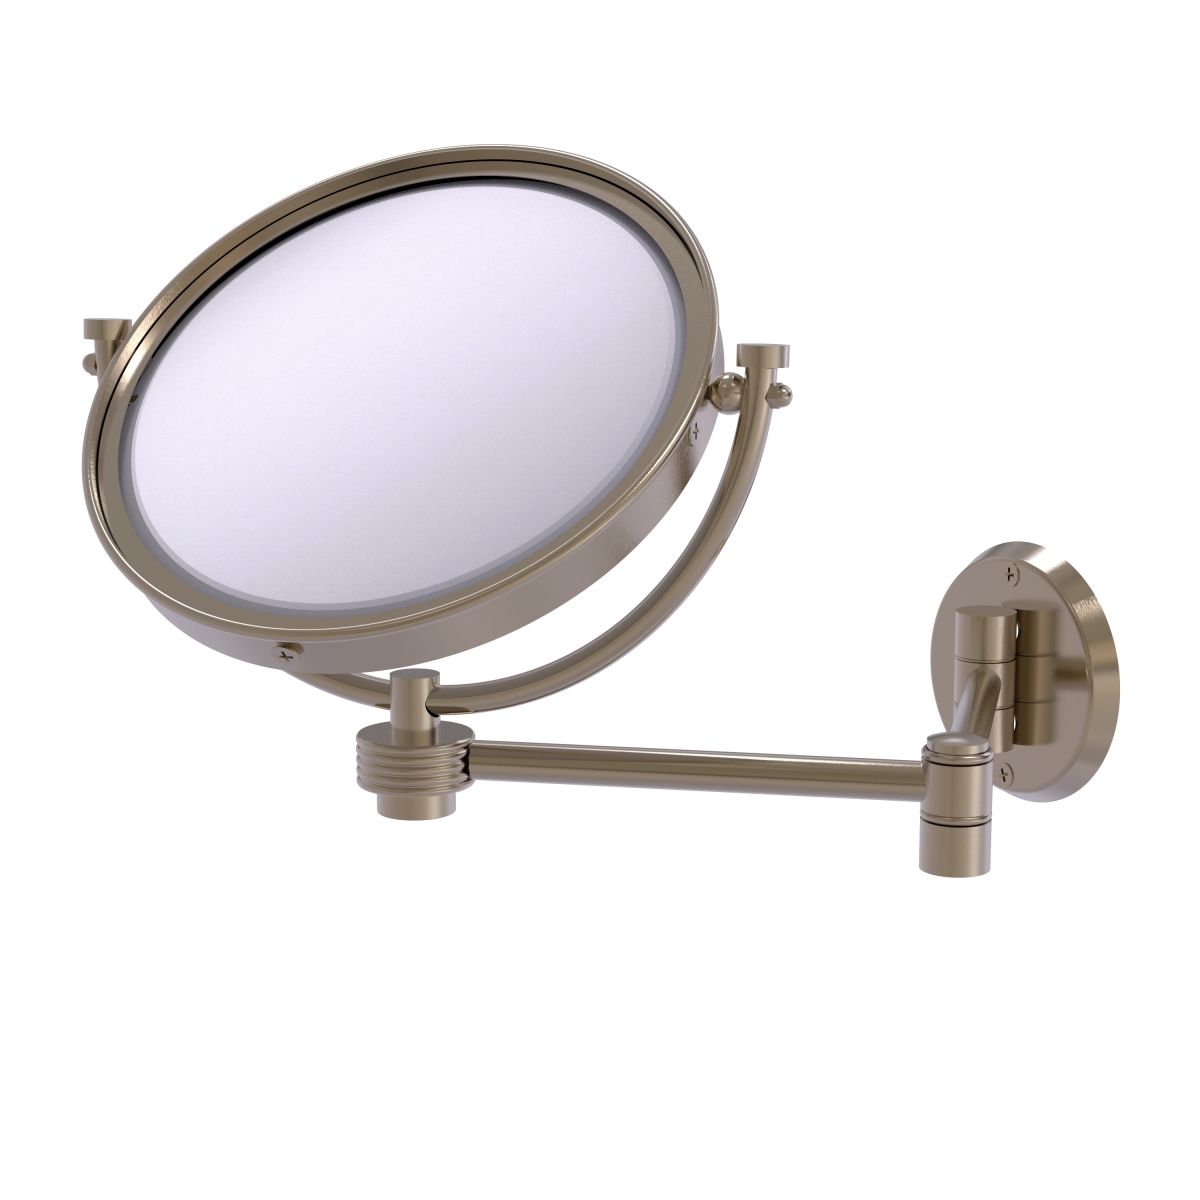 WM-6G-2X-PEW 8 in. Wall Mounted Extending Make-Up Mirror 2X Magnification with Groovy Accent, Antique Pewter -  Allied Brass, WM-6G/2X-PEW